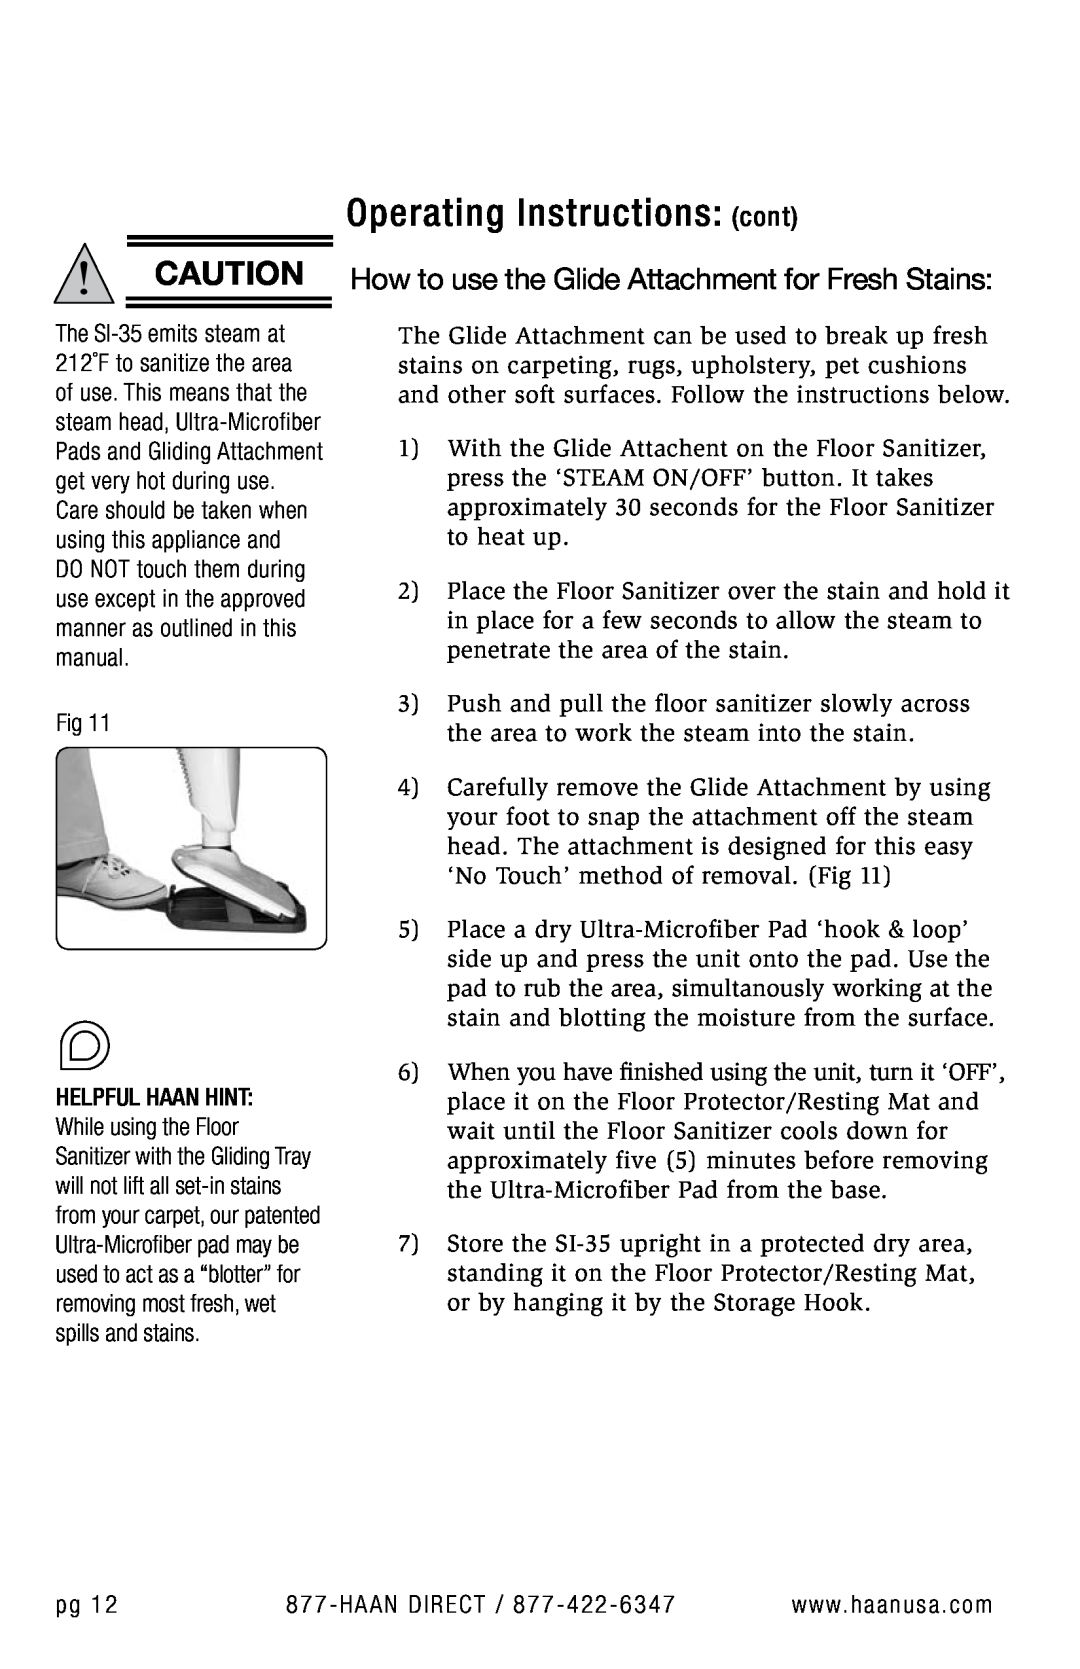 Haan SI-35 How to use the Glide Attachment for Fresh Stains, Operating Instructions cont, HAAN DIRECT / 877 - 422 